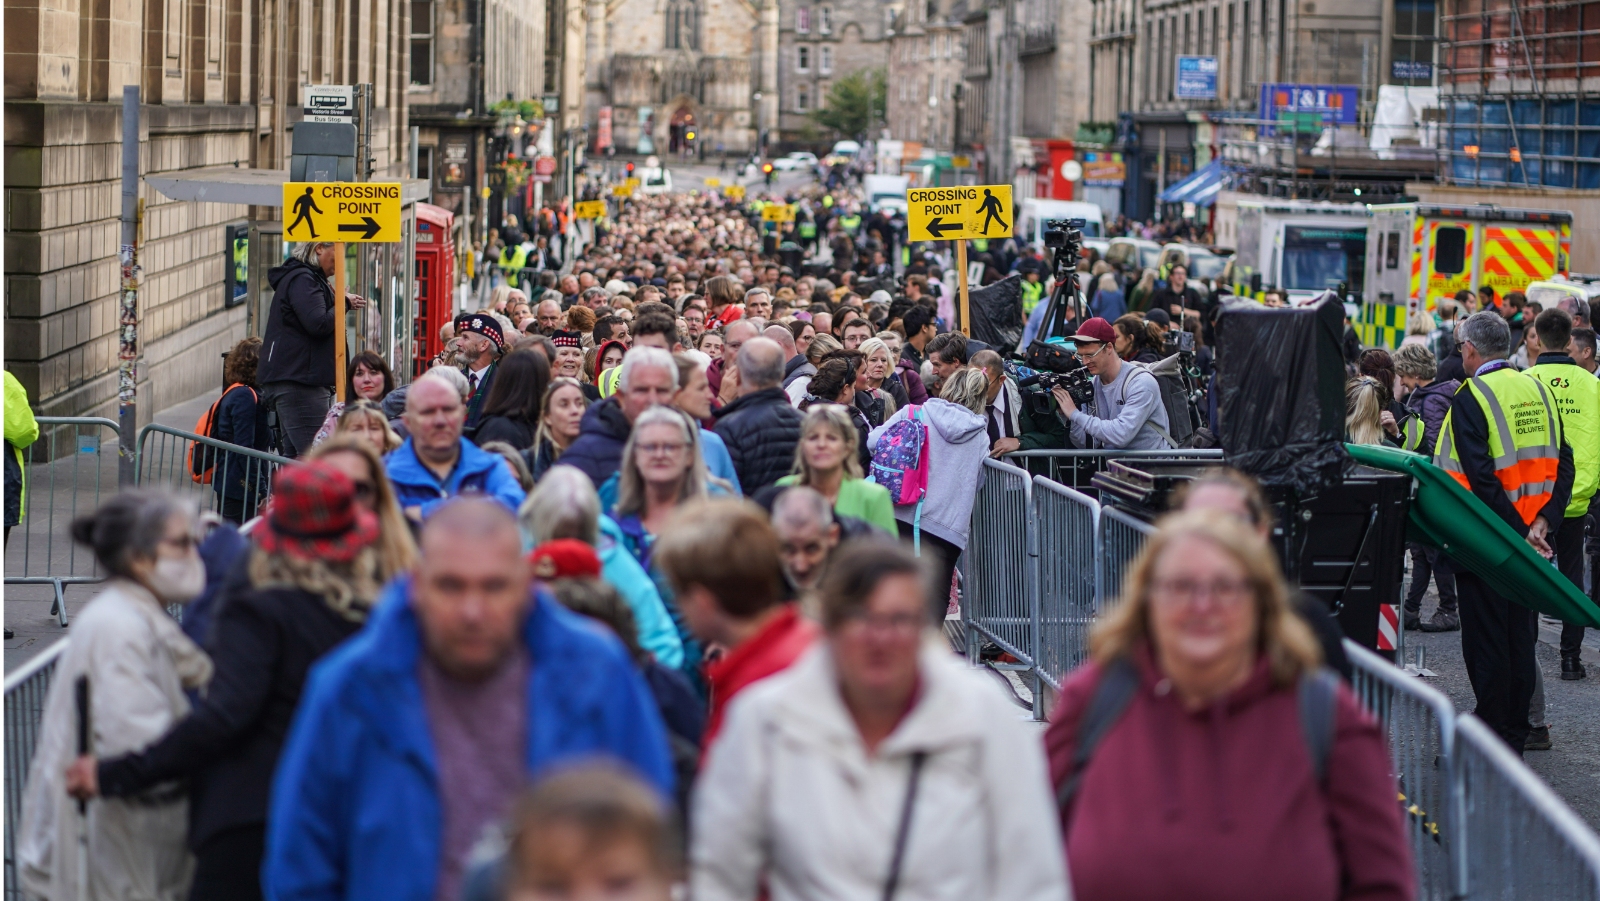 Huge crowds queued to view the Queen's coffin at St Giles' Cathedral.